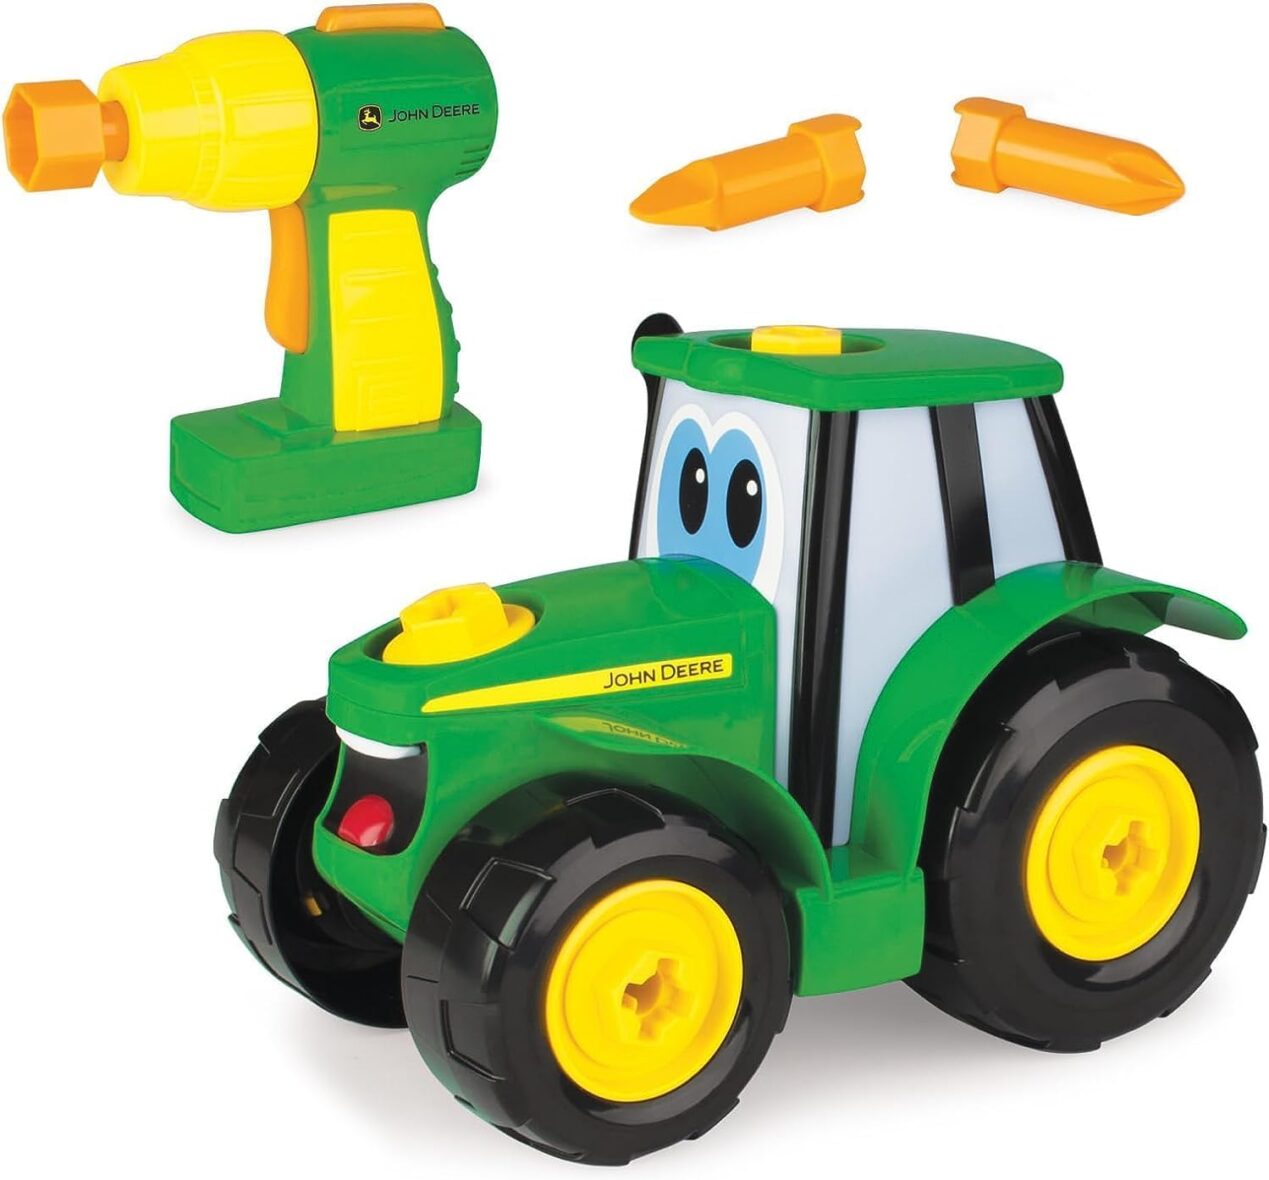 Tomy John Deere Build-A-Johnny Tractor Toy